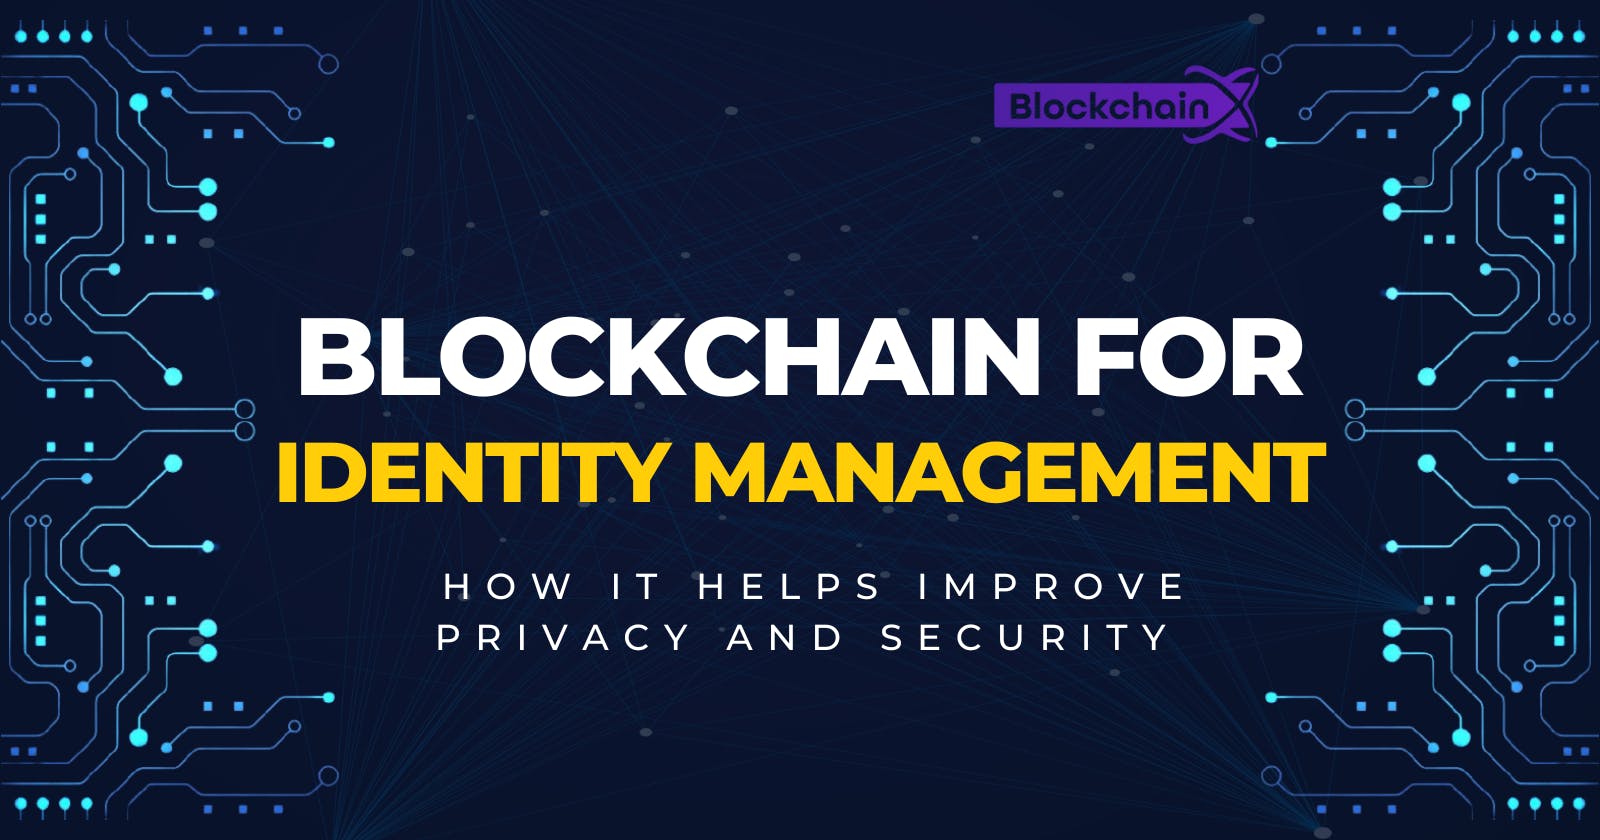 Blockchain for identity management: how it helps improve privacy and security